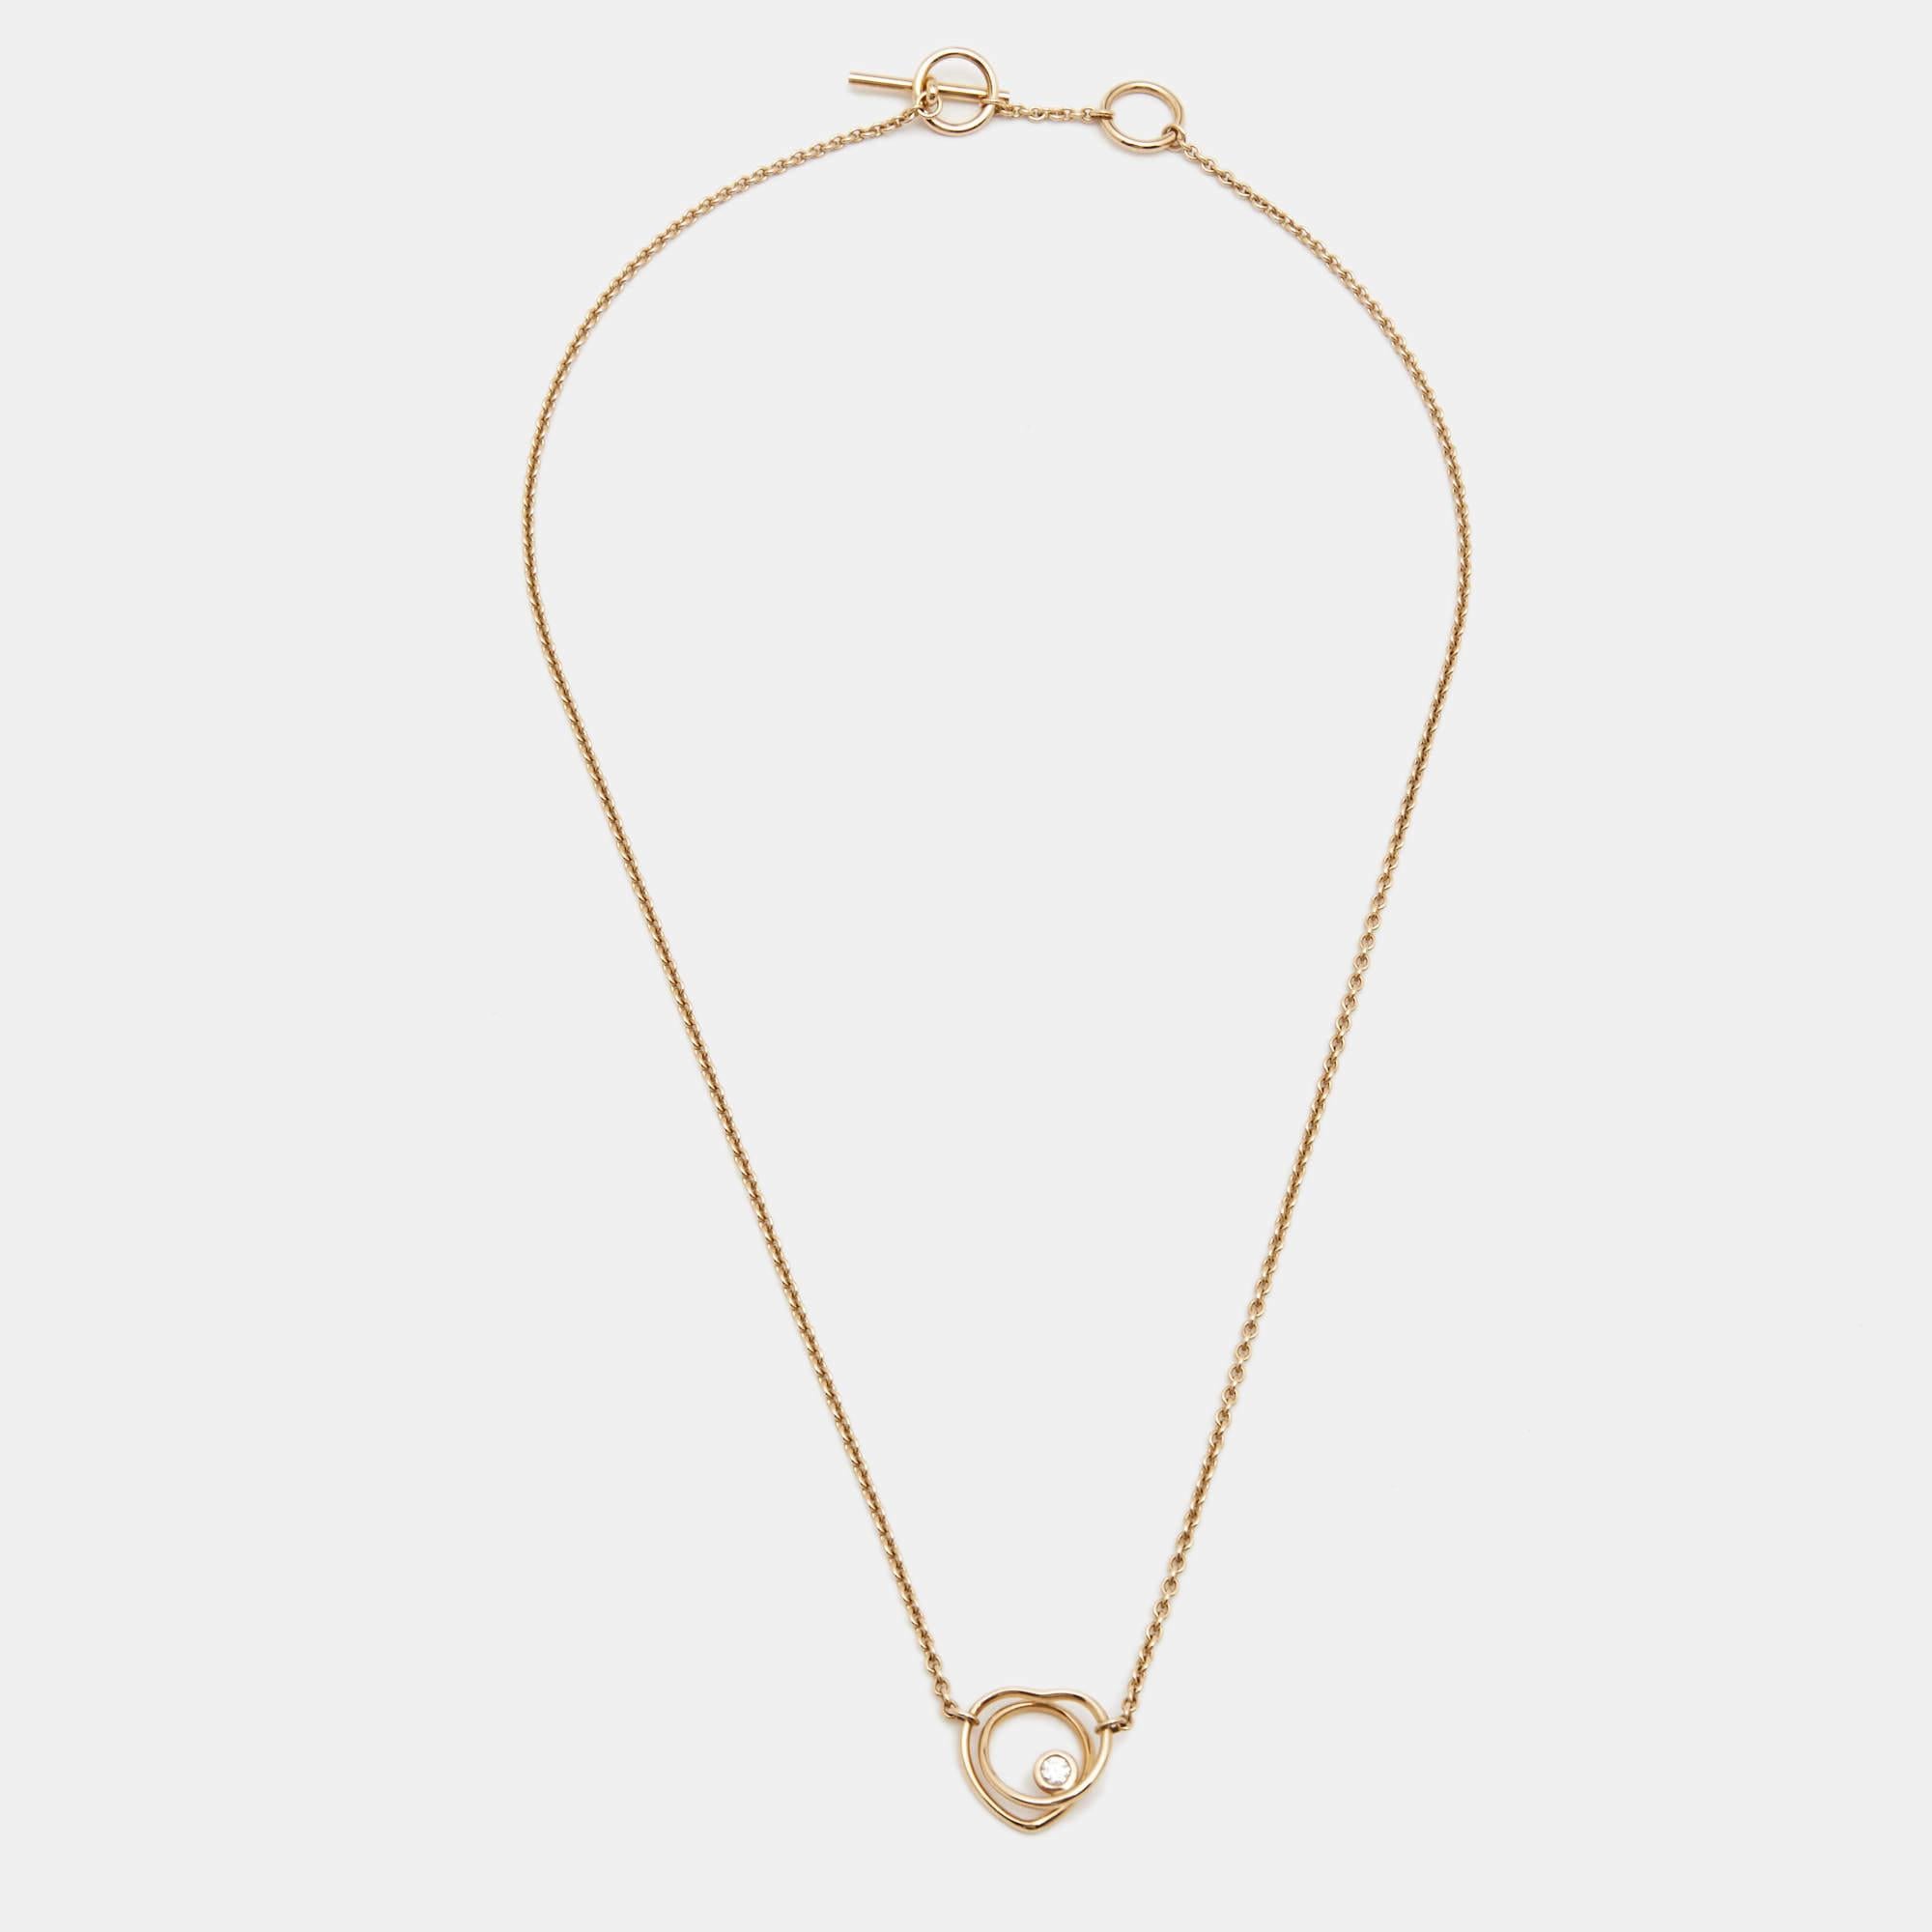 Hermes is a brand that delivers crafts with art and creativity. All their designs have a high-end blend of beauty and fashion. This exquisite necklace has been crafted from the finest selection of materials to be a timeless accessory.

